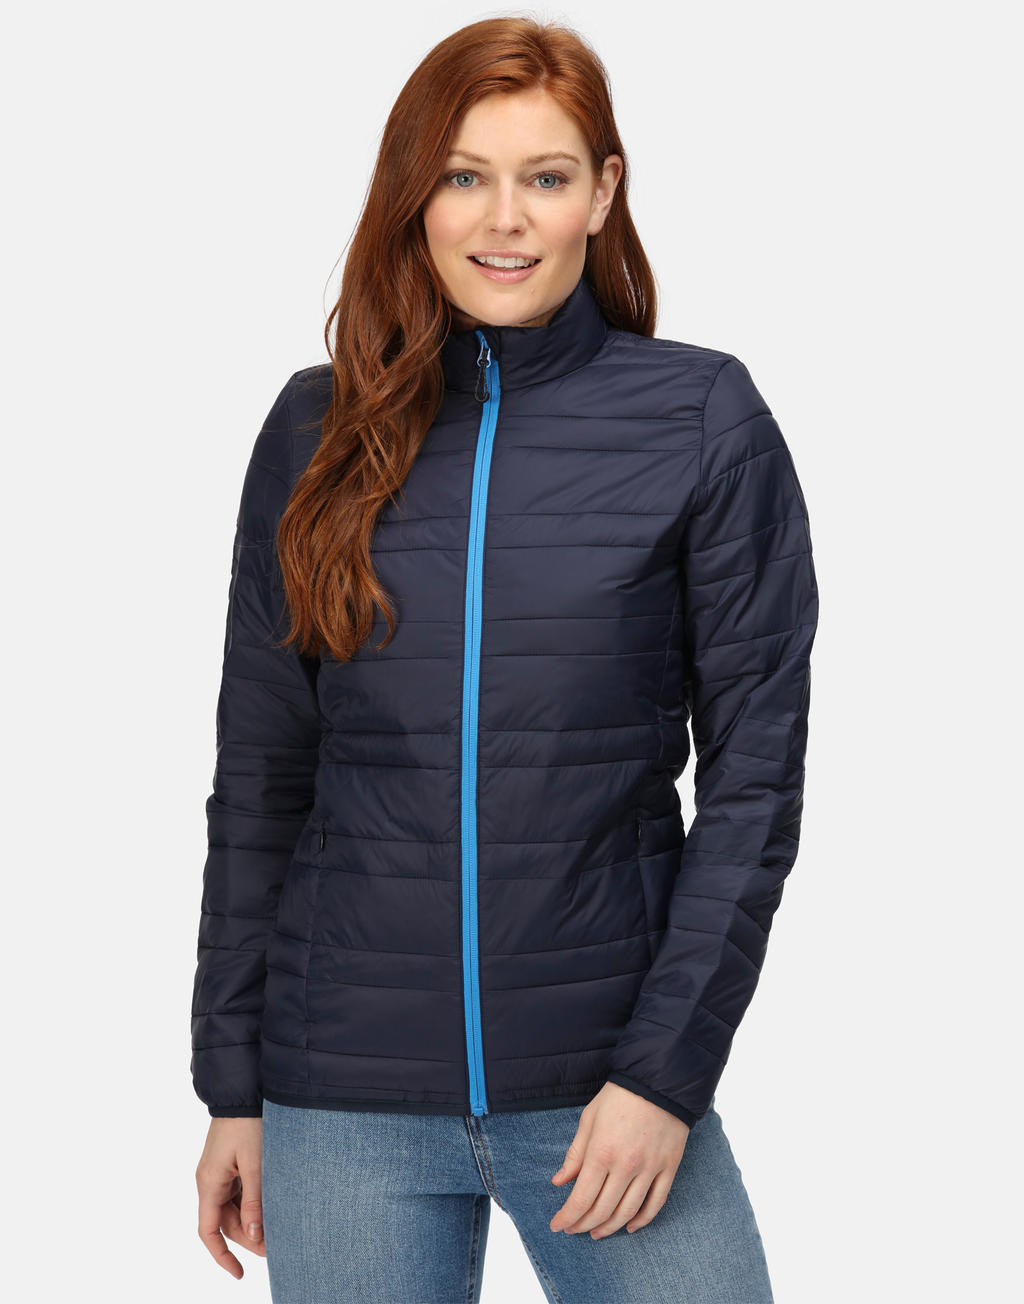  Womens Firedown Down-Touch Jacket in Farbe Black/Black